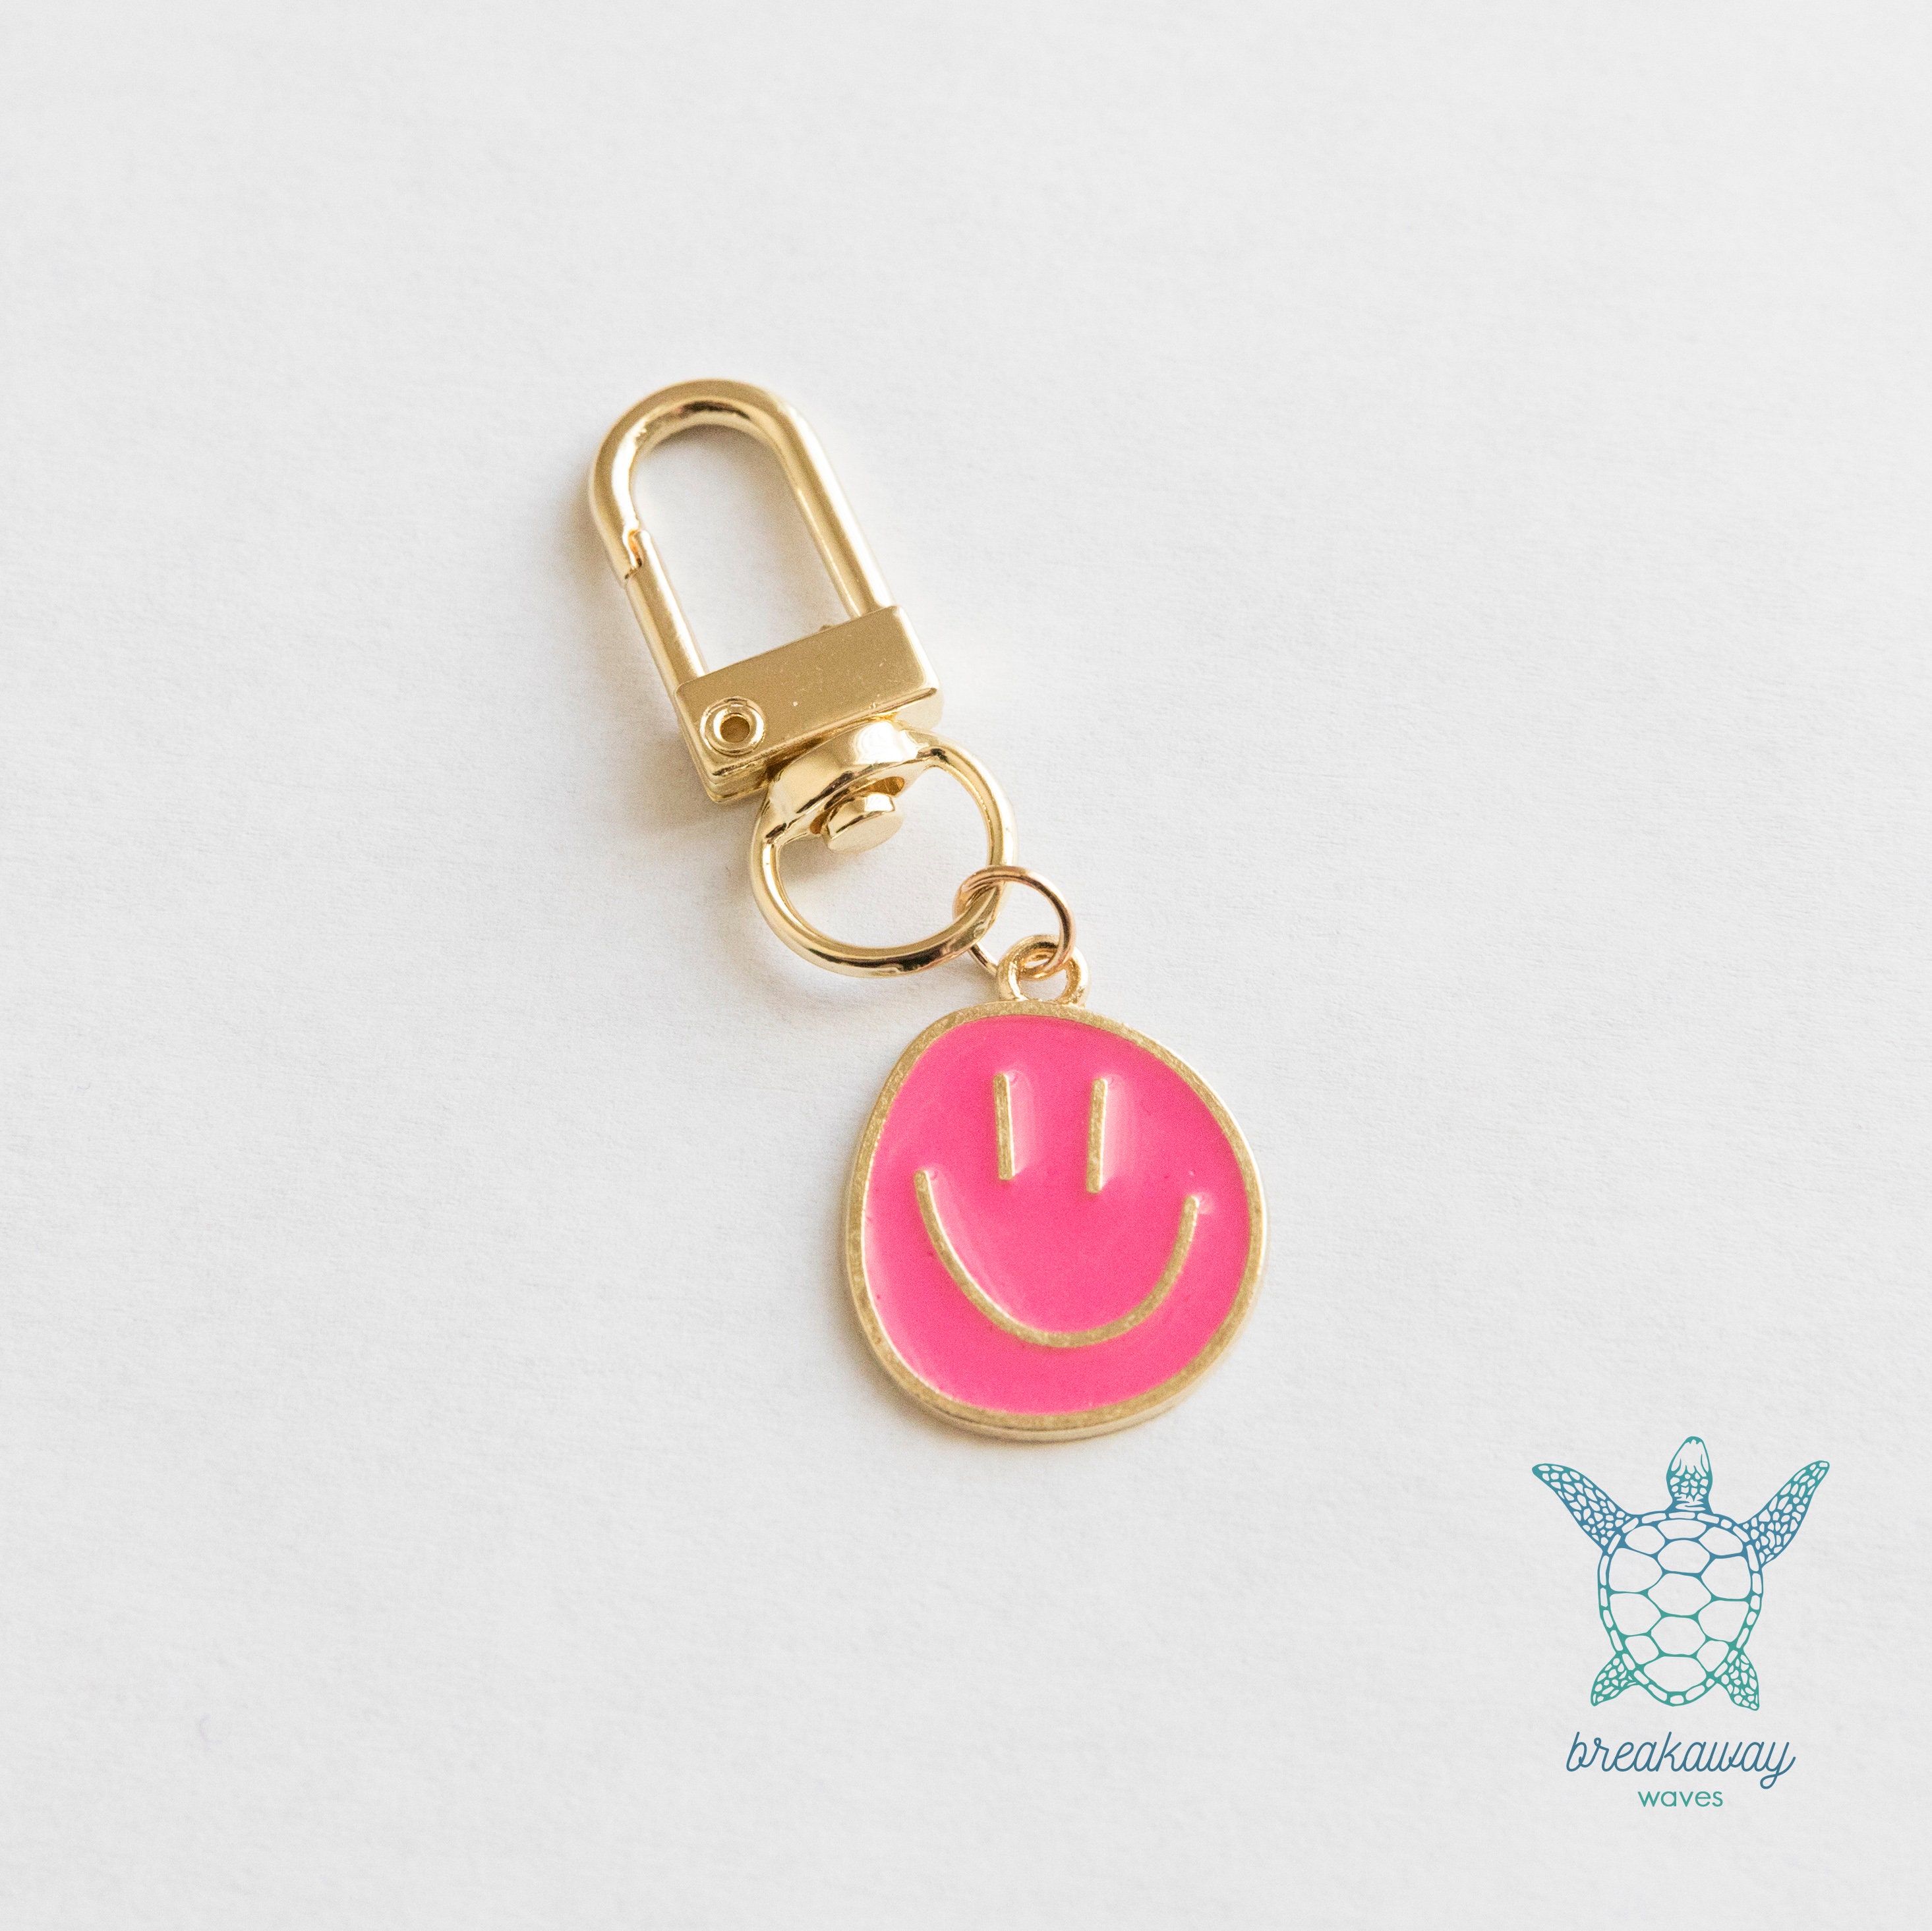 Winnie and Me Custom Happy Face Keychain with Name